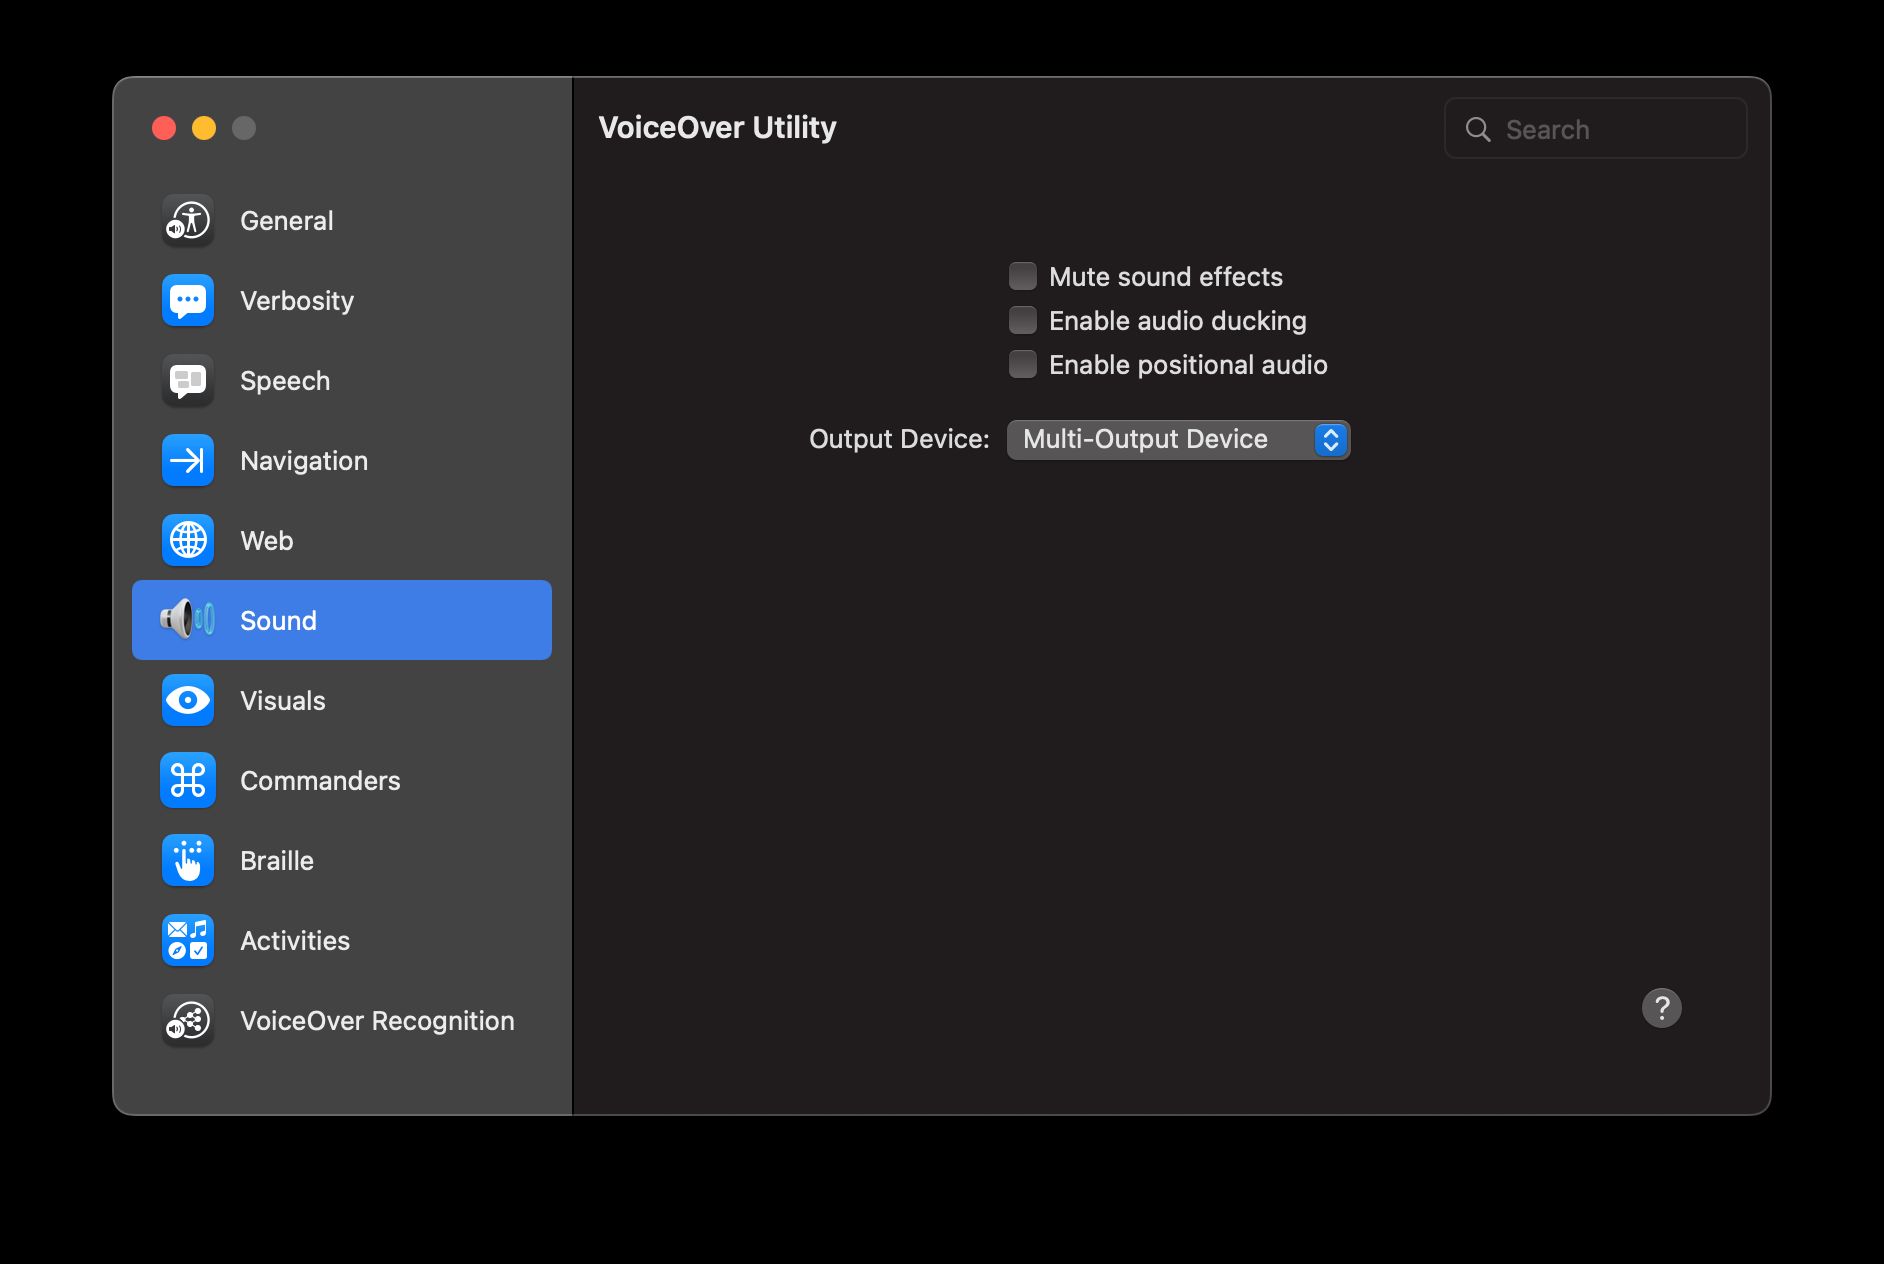 VoiceOver Utility showing Sound tab showing Output Device set to Multi-Output Device